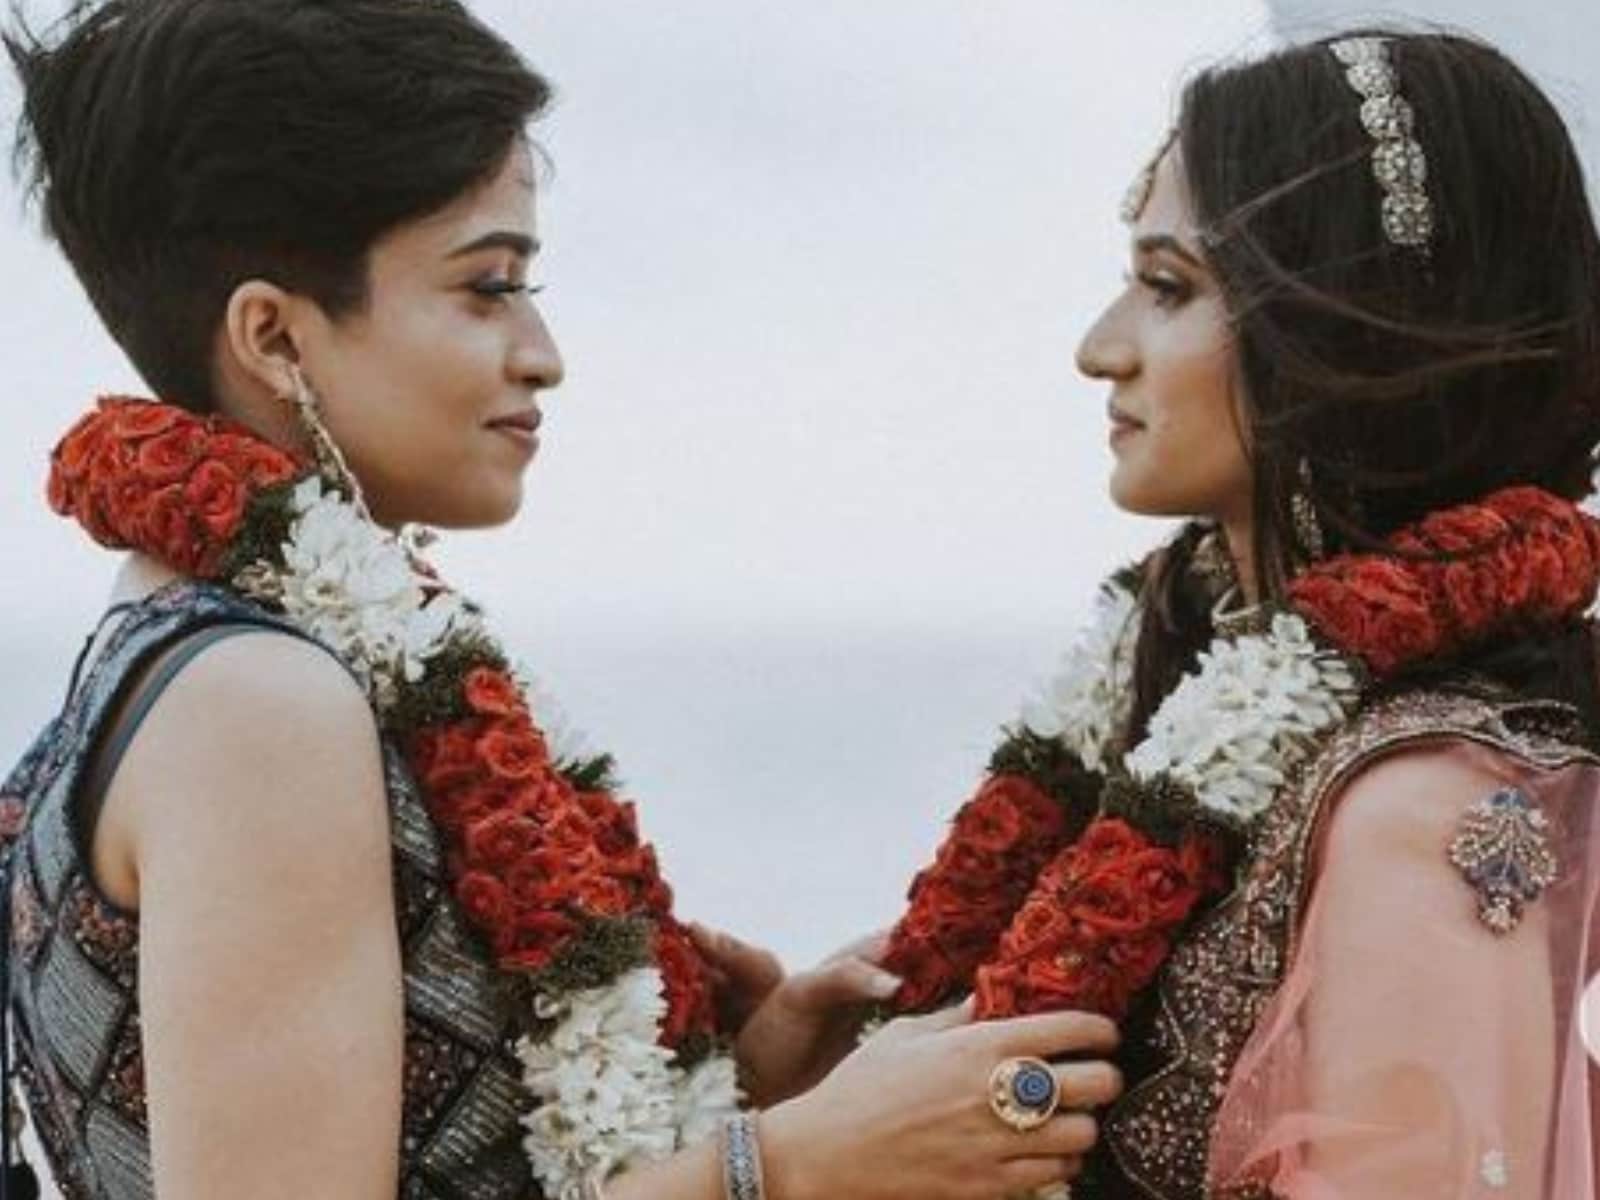 Kerala Lesbian Couple, Once Separated by Families, Turns Brides in Wedding  Photoshoot - News18